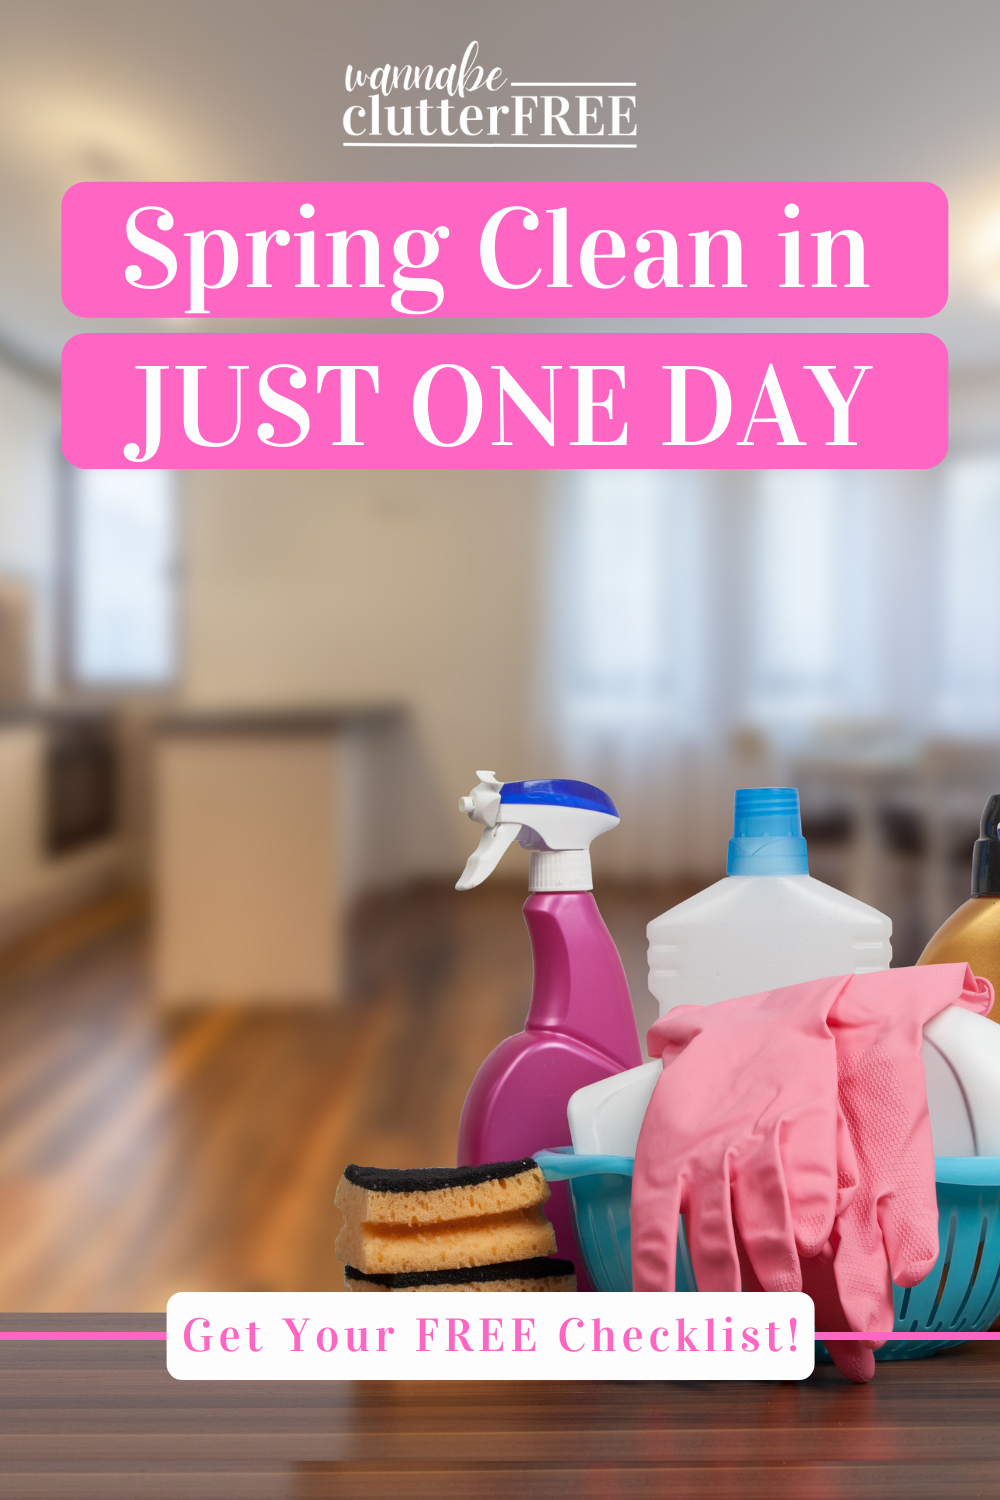 Spring Clean in JUST ONE DAY!